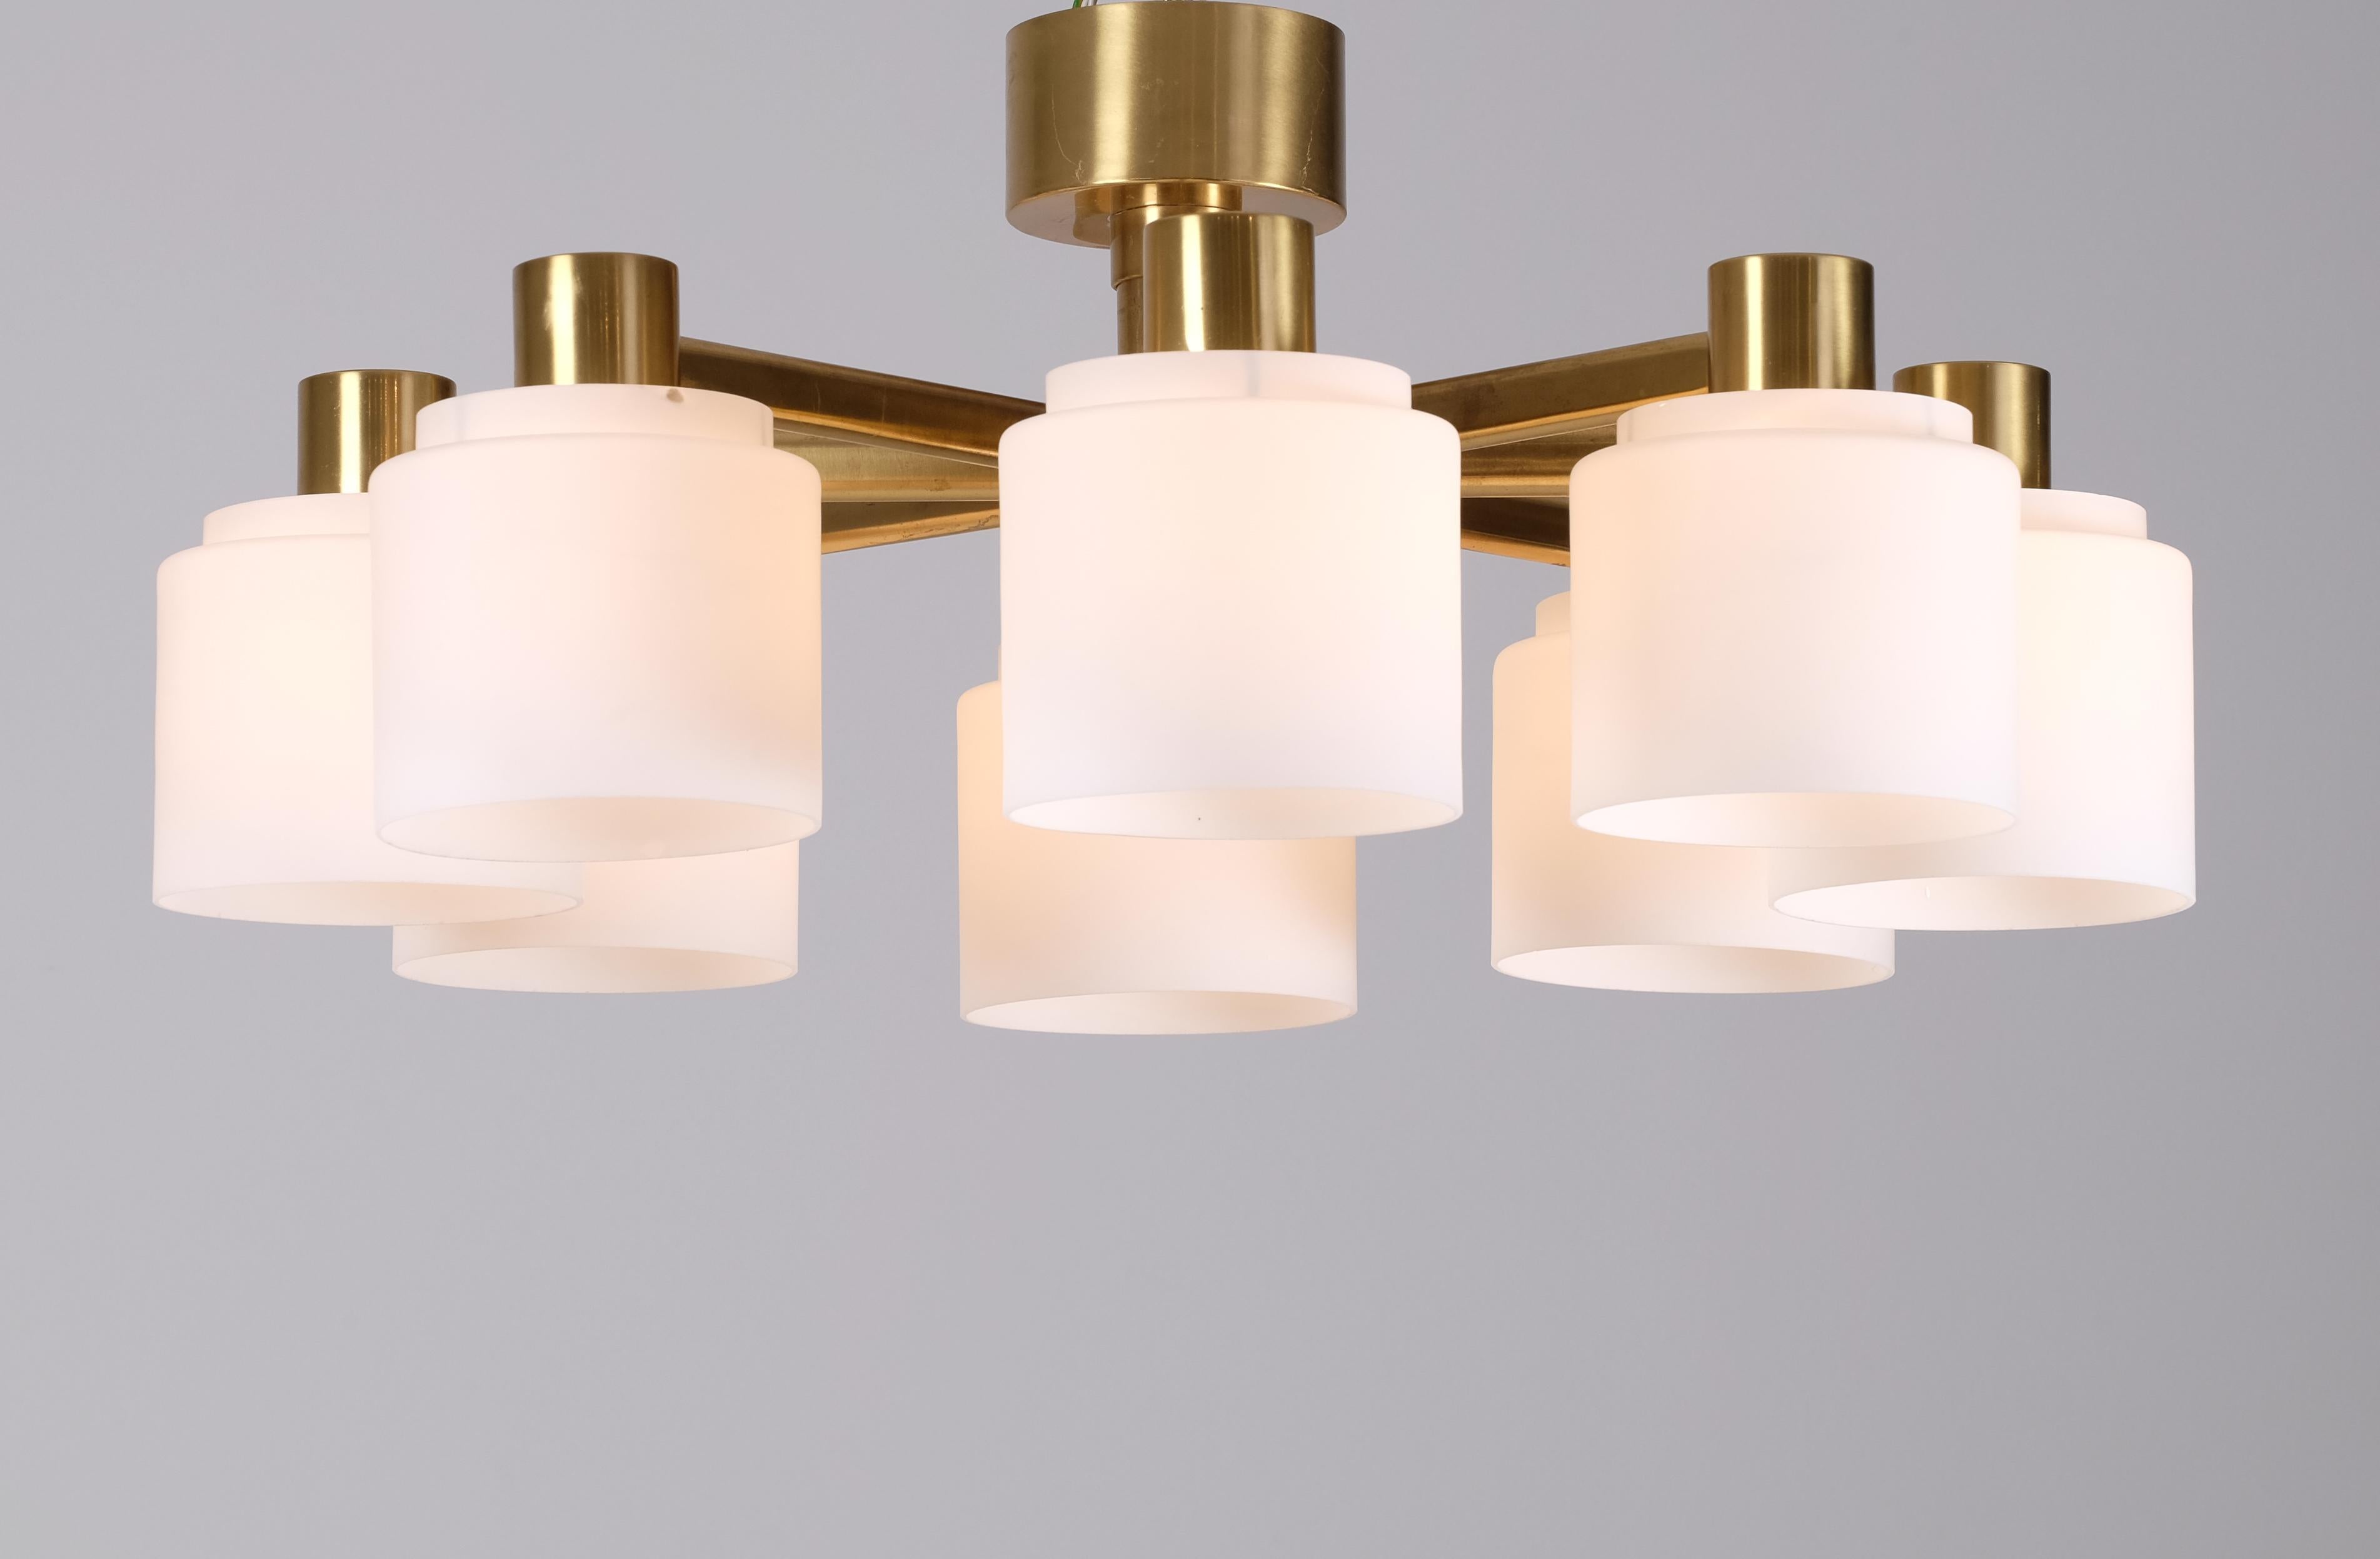 Set of 3 Swedish Ceiling Lights by Boréns, Sweden, 1960s For Sale 4